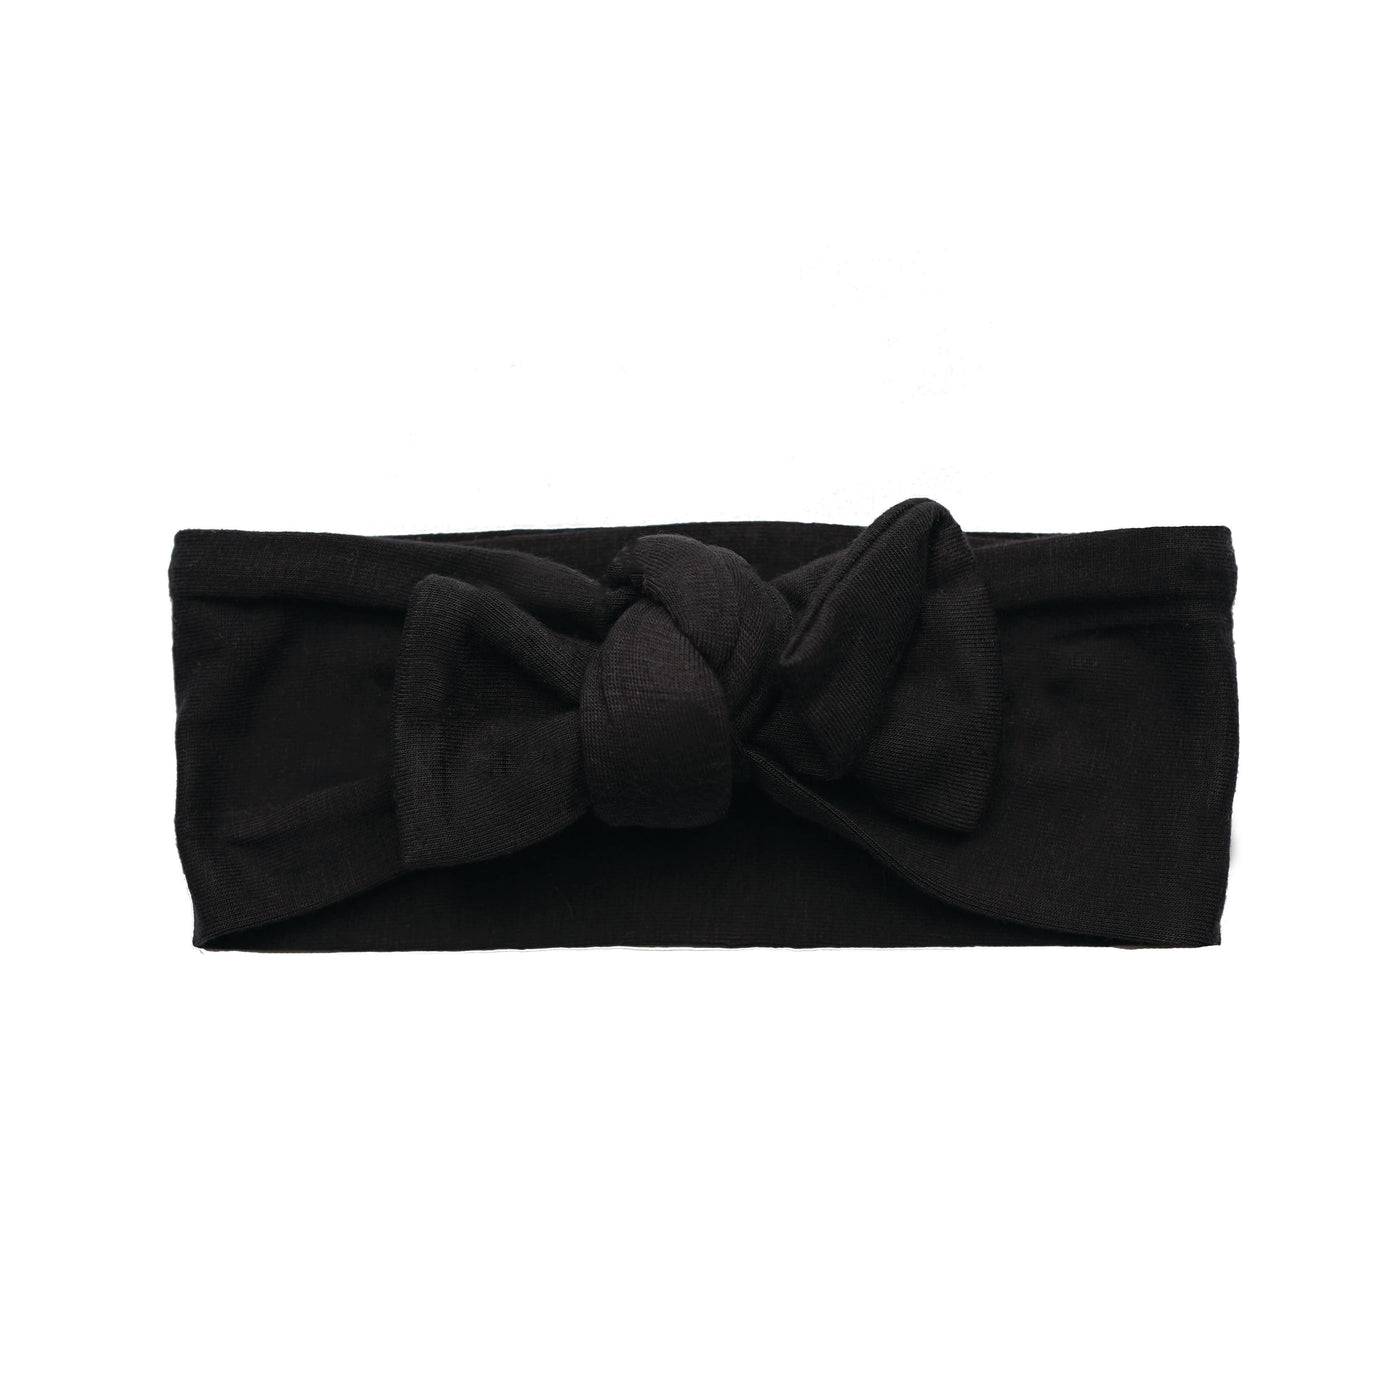 Emerson and Friends Midnight Black Bamboo Headband Bow - Simple Good